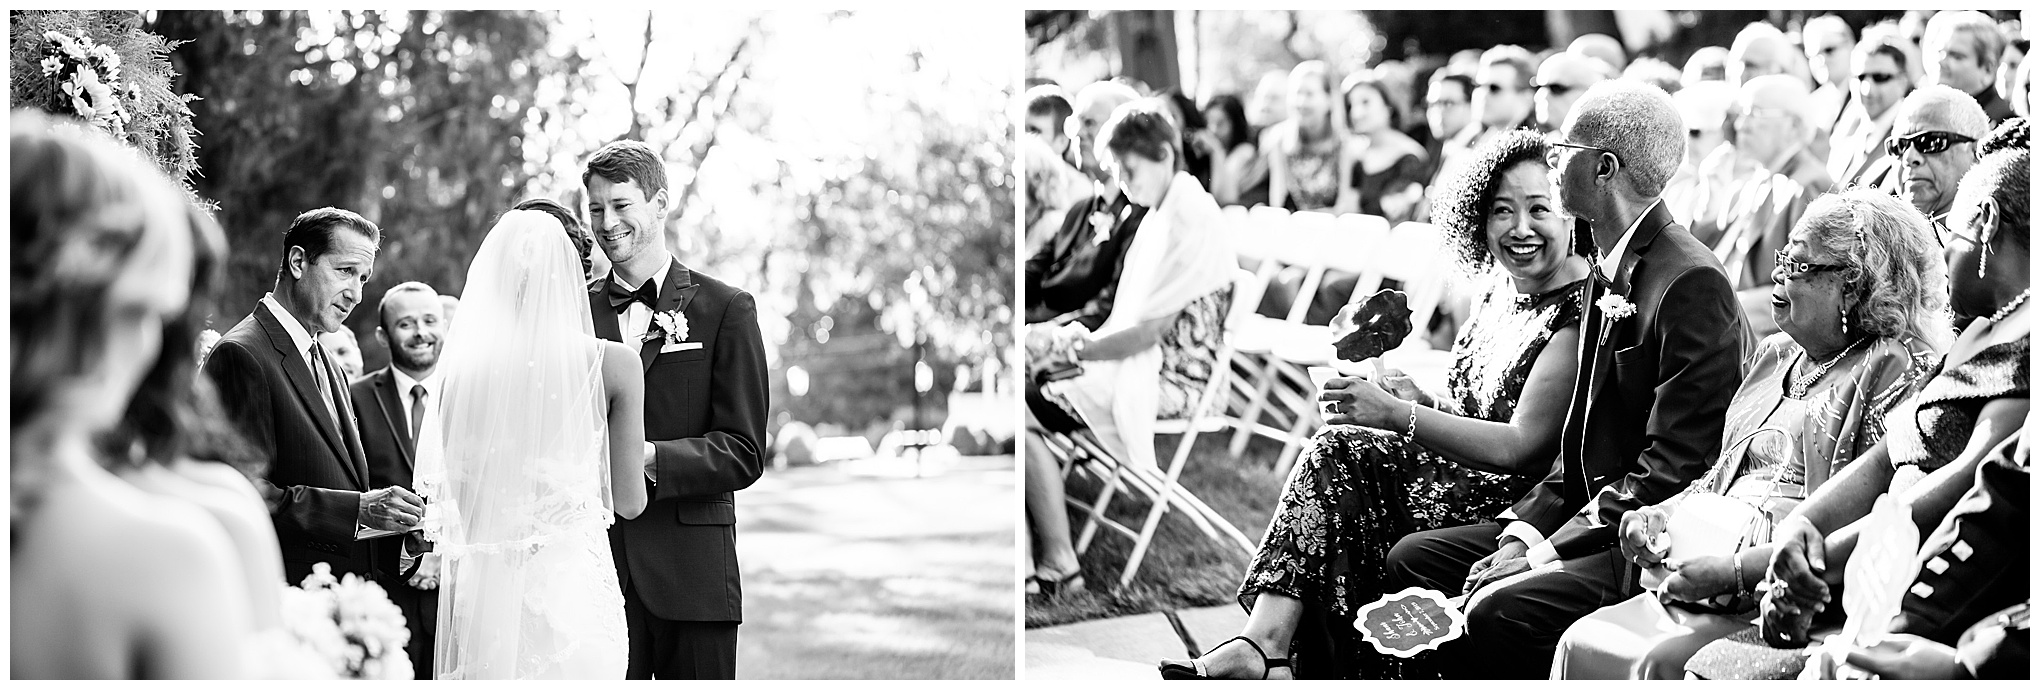 summer mansion at valley country club wedding, Maryland wedding, MD wedding, Maryland wedding photographer, summer wedding, summer wedding inspiration, Baltimore wedding photographer, DC wedding photographer, country club wedding, yellow aesthetic, Rachel E.H. Photography, black and white wedding ceremony